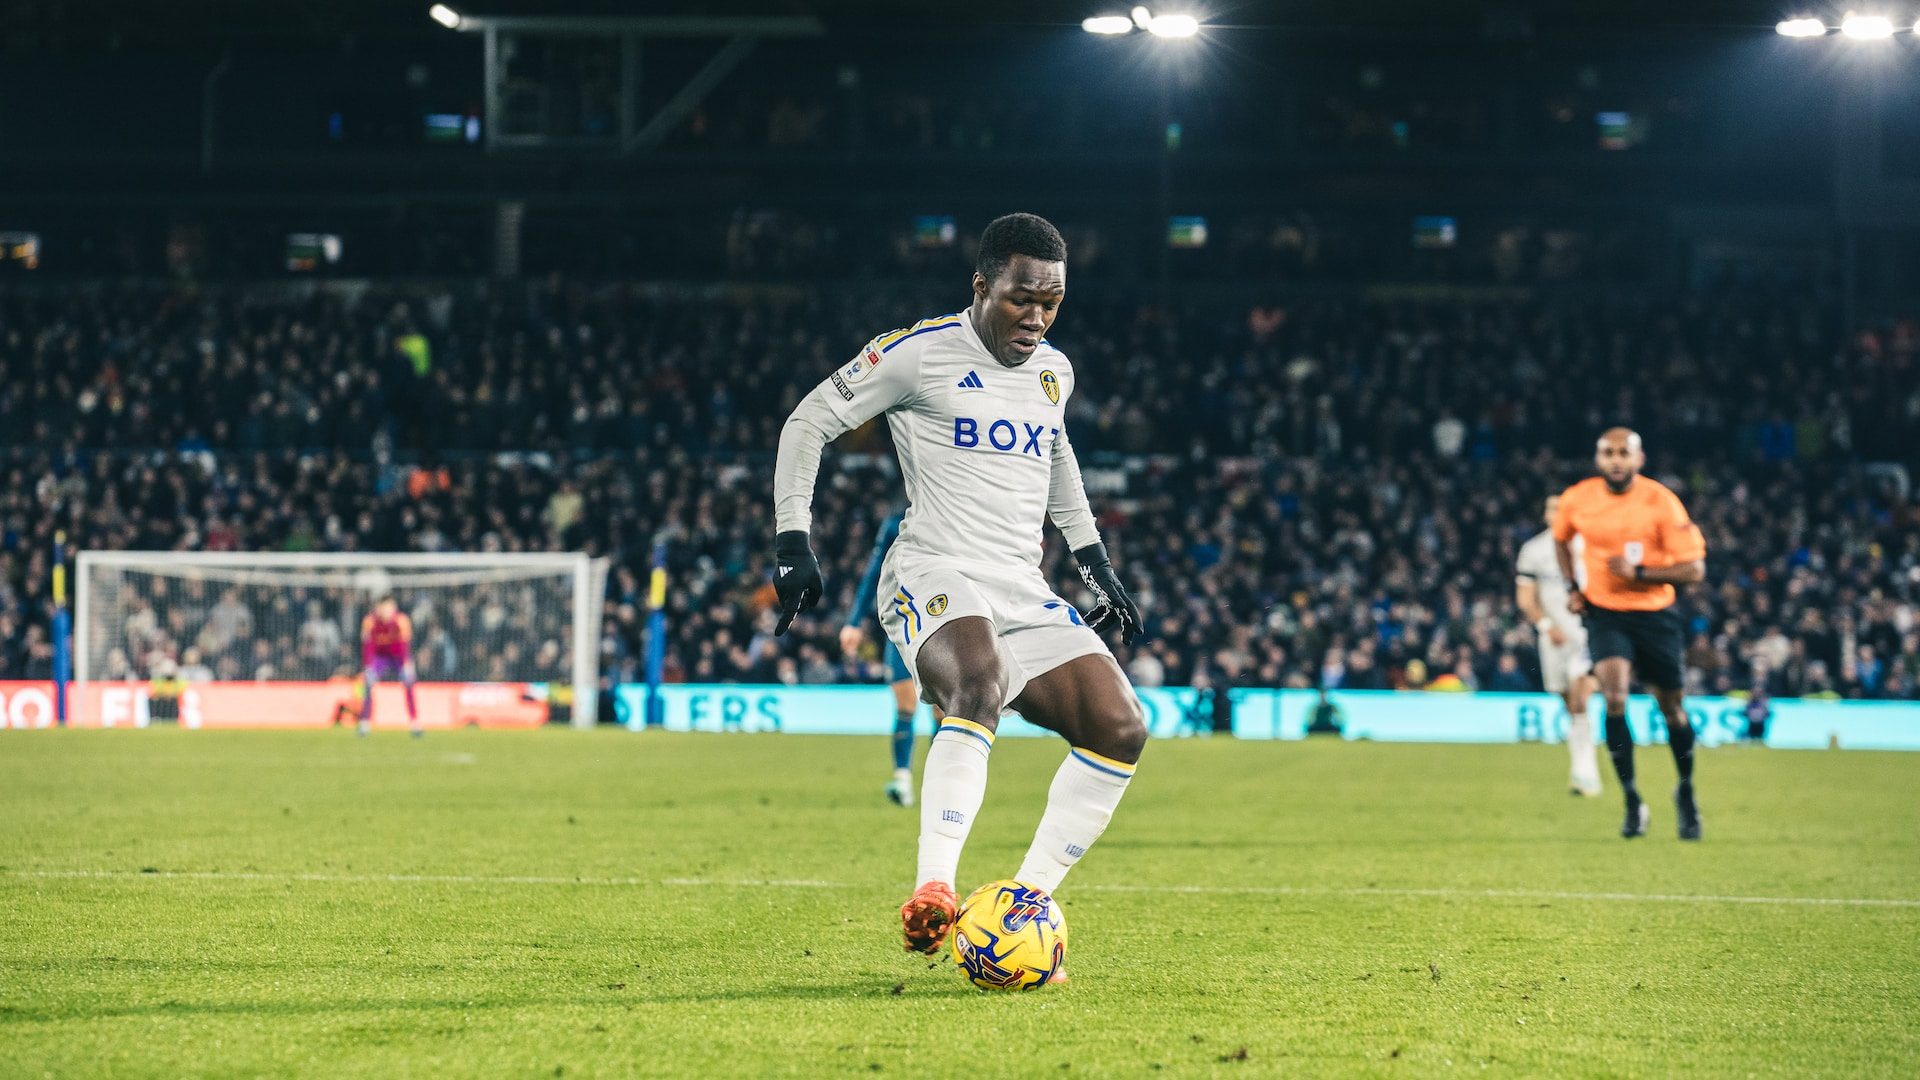 A photograph of Wilf Gnonto controlling a ball under the lights at Elland Road, wearing a long sleeve white home kit and gloves